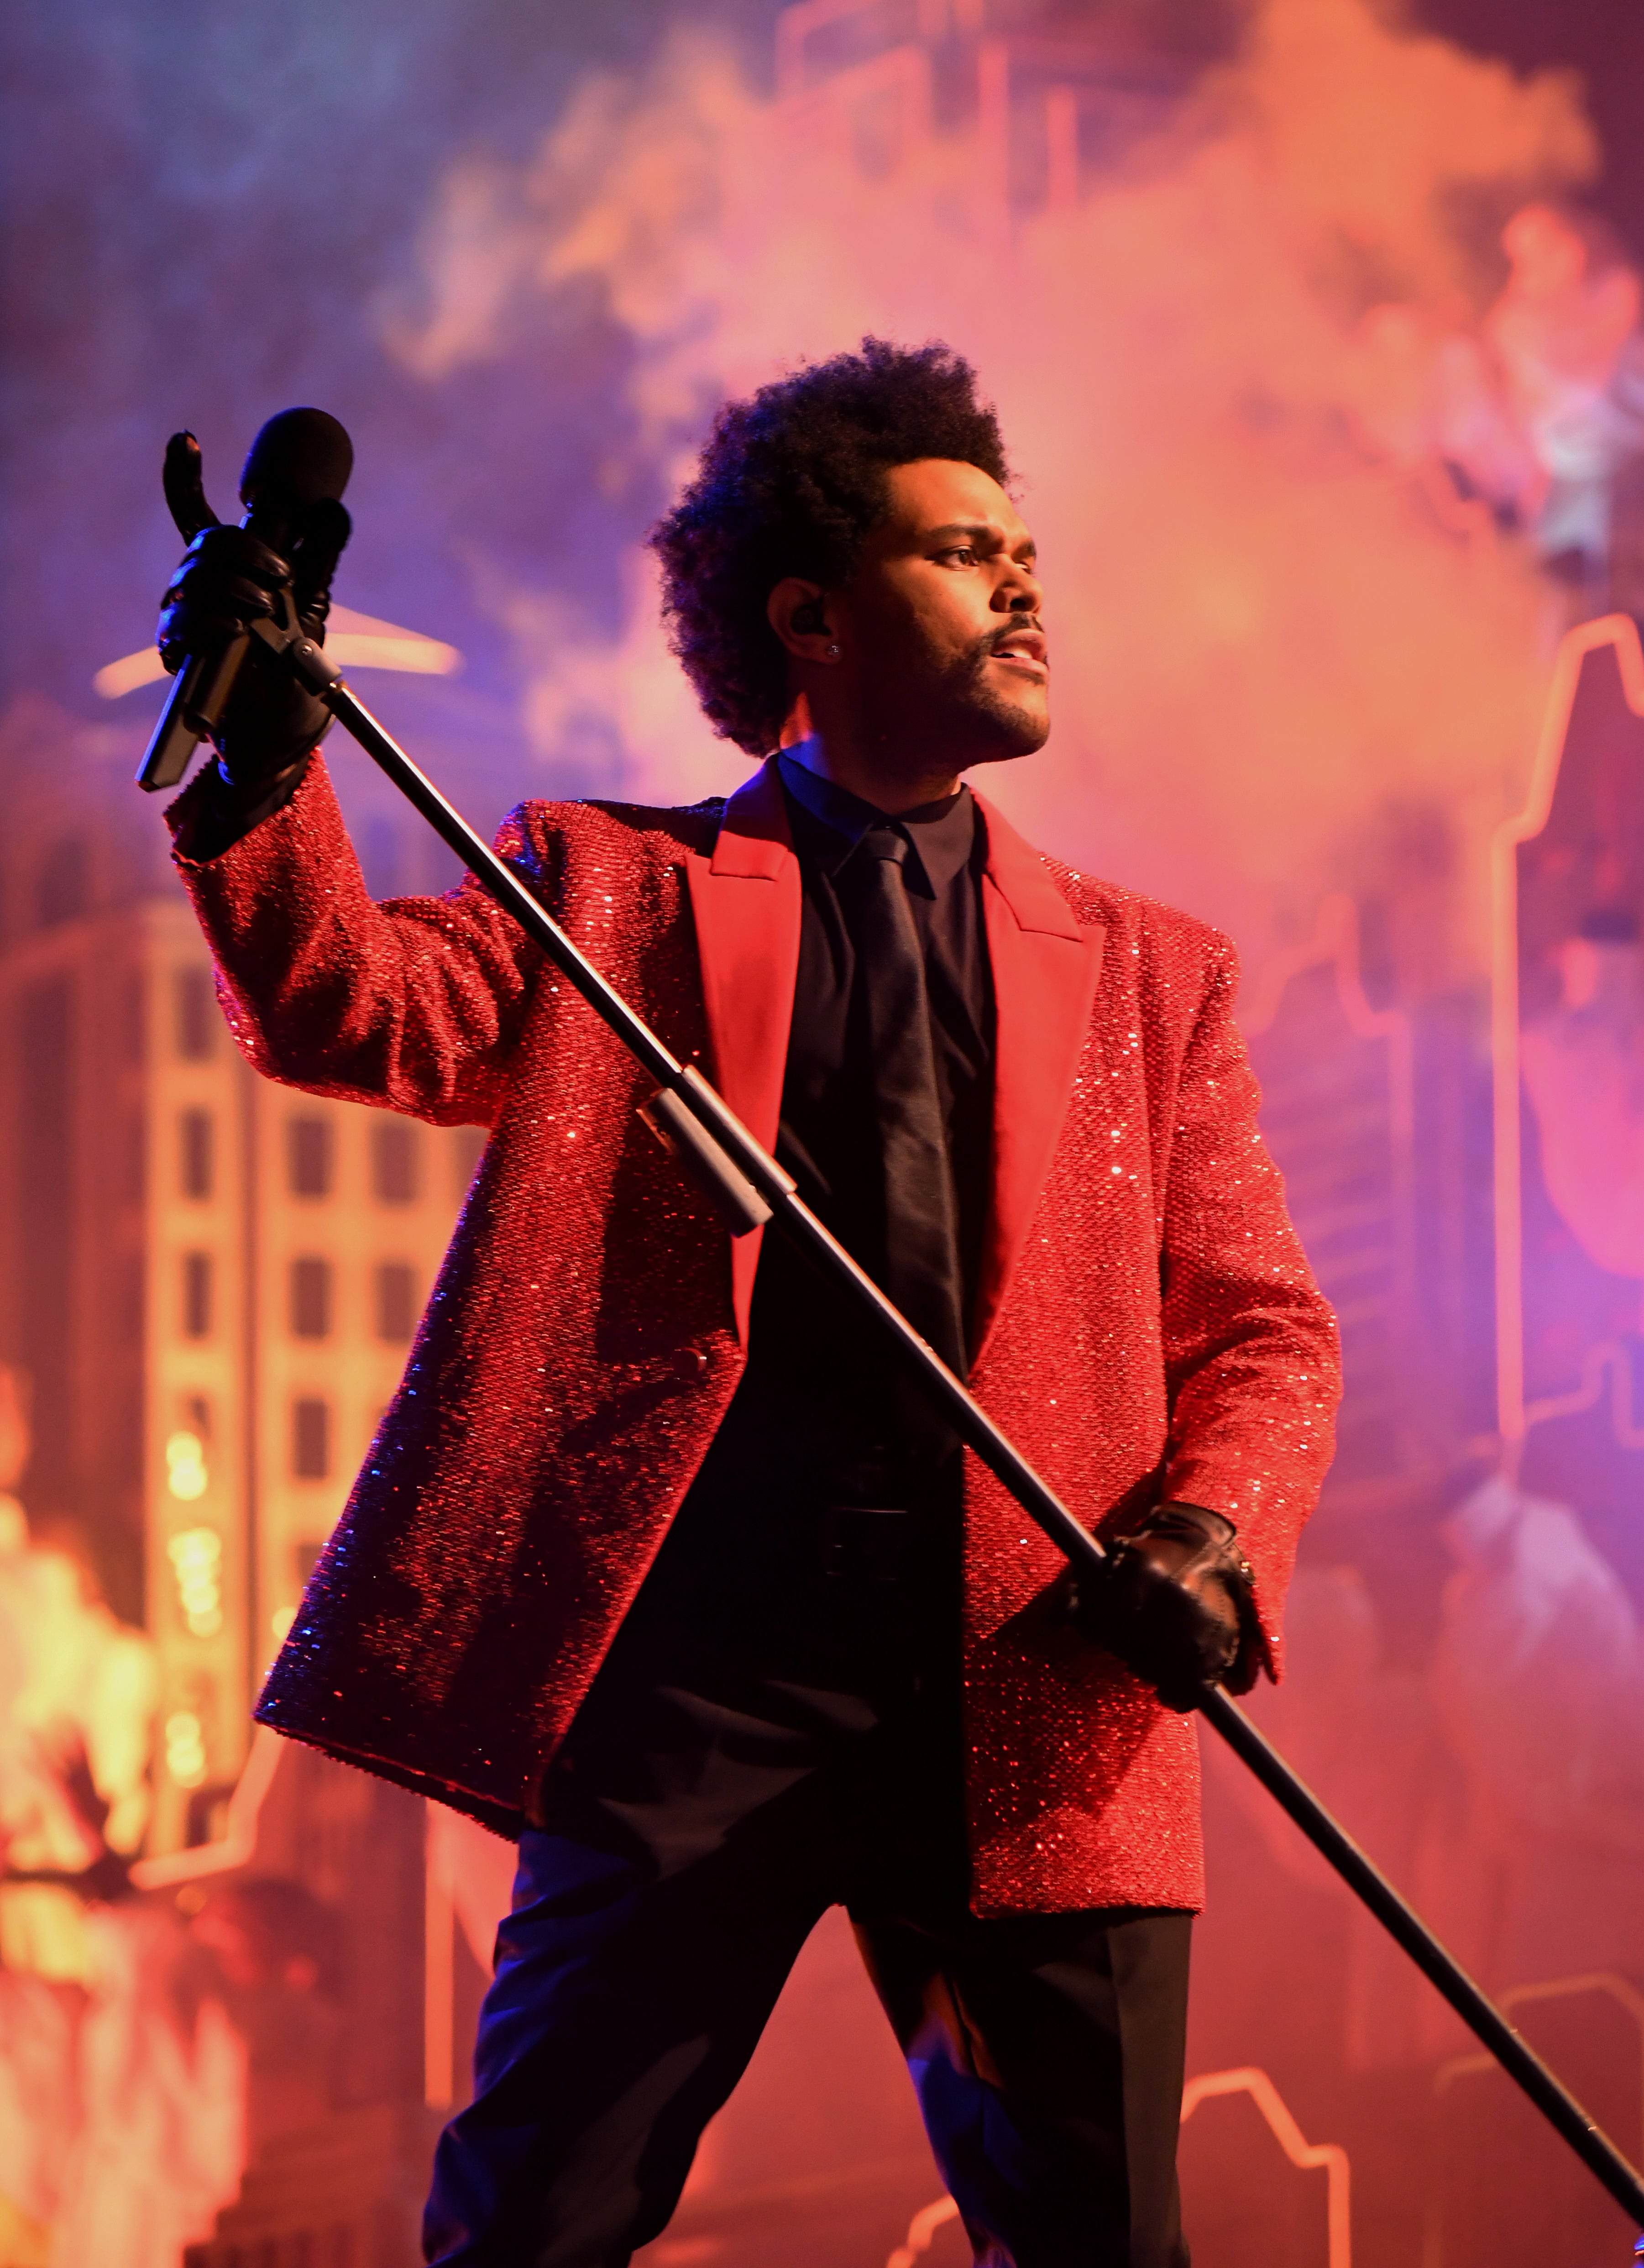 The Weeknd retires his red suit at Billboard Music Awards 2021